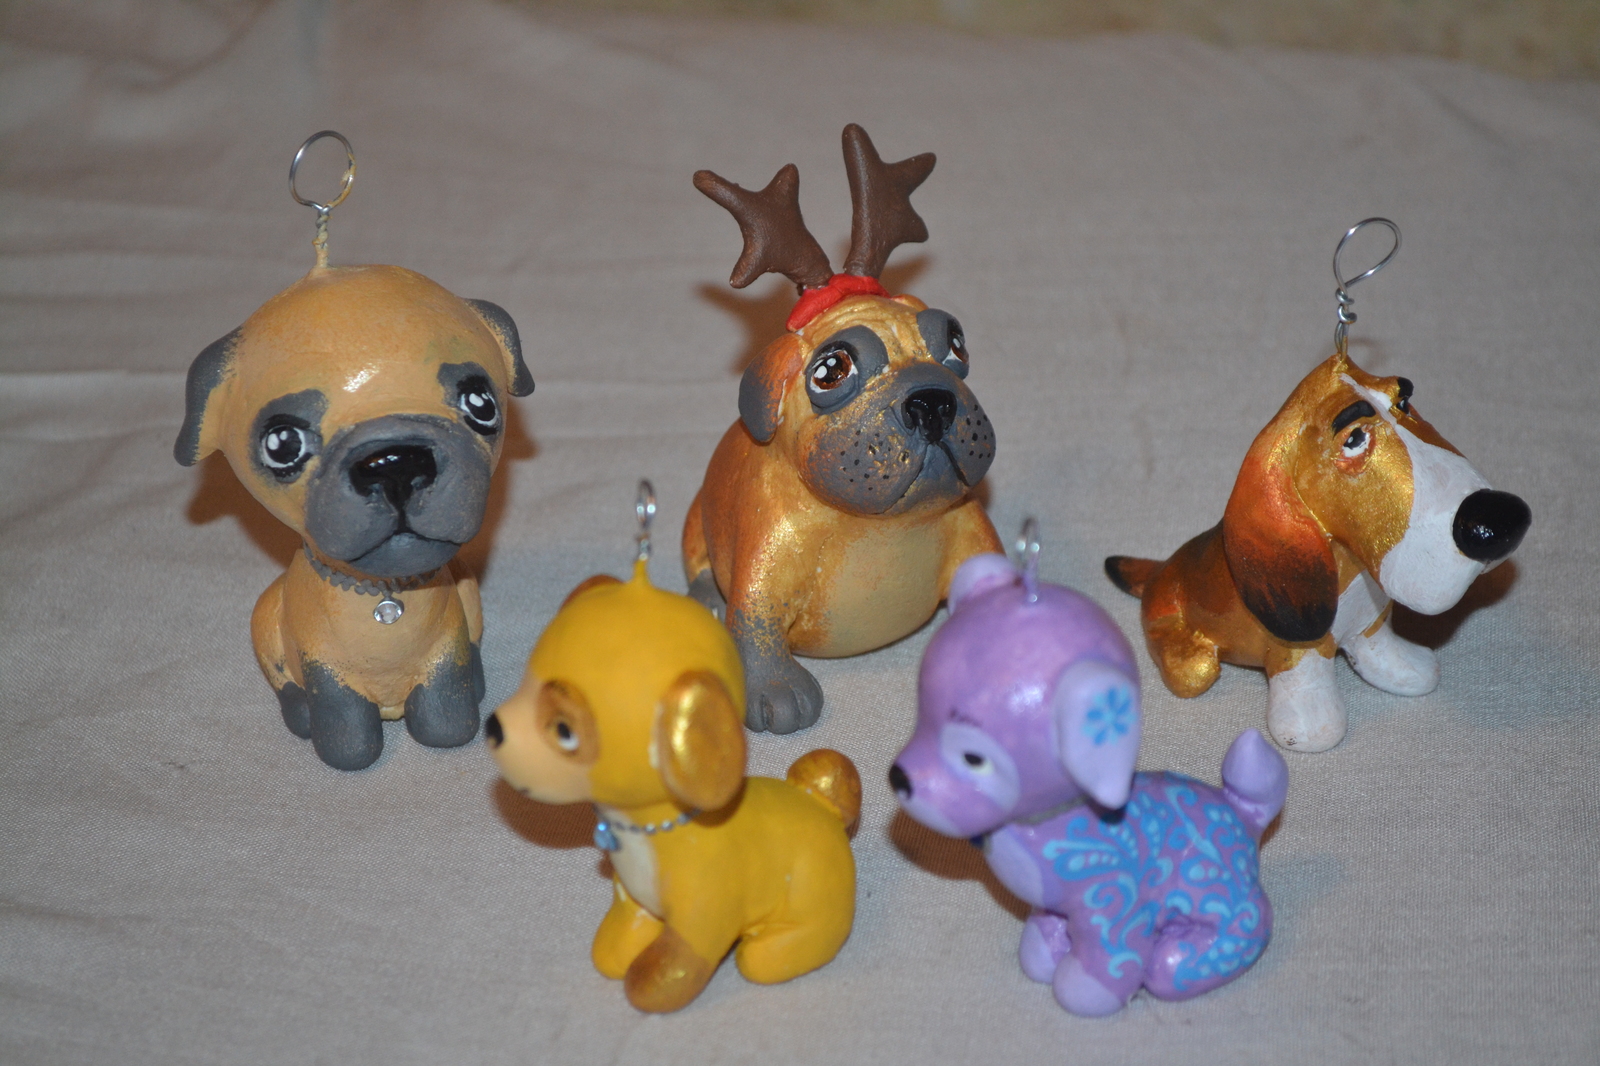 Family tradition - My, Family, Toys, New Year, Polymer clay, Traditions, Needlework without process, Longpost